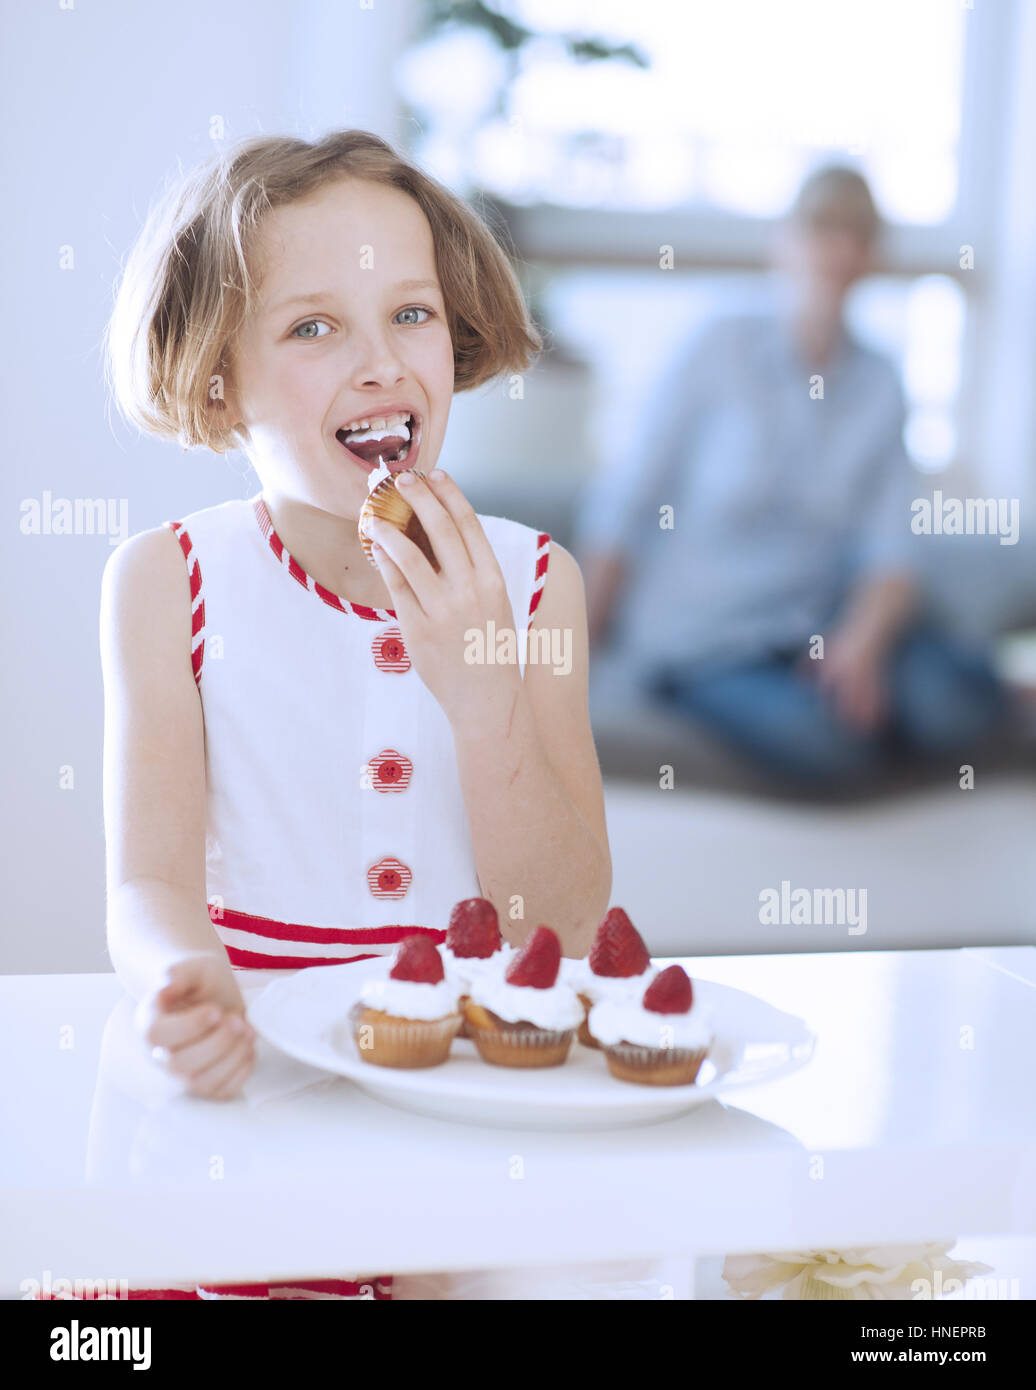 Young Girl eating cup cake Banque D'Images